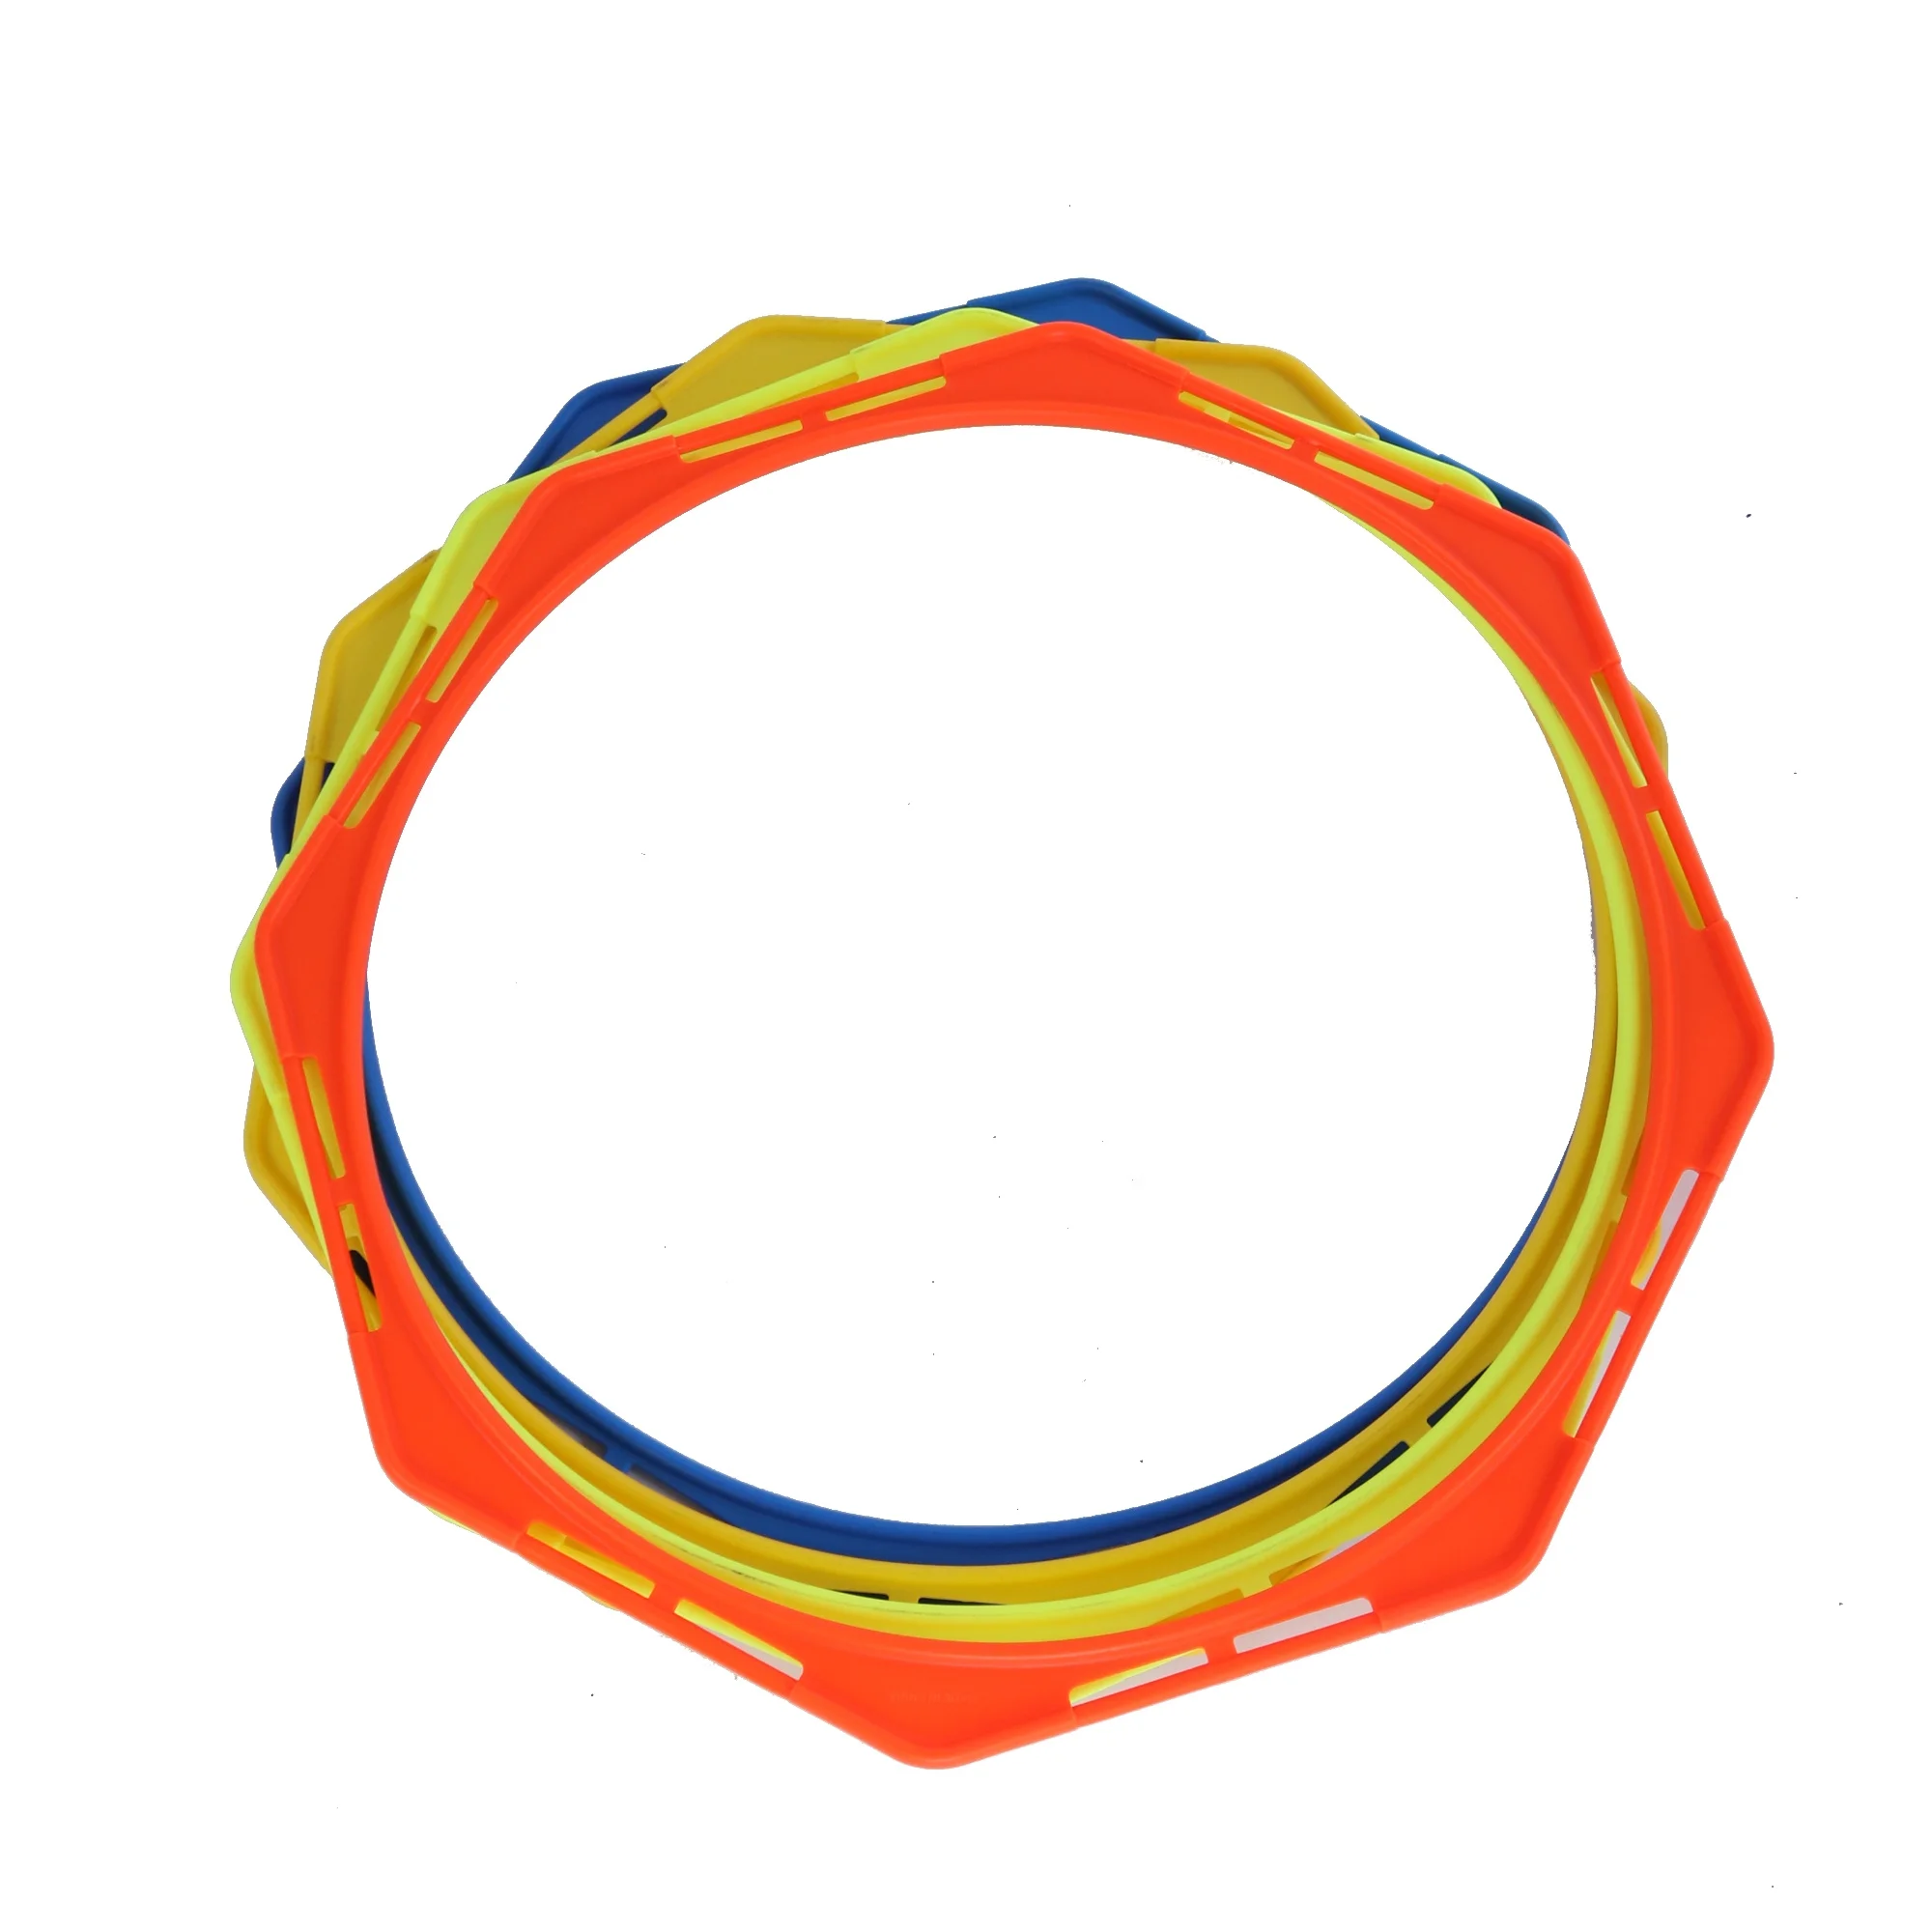 New products unique design field training equipment soccer training circle rings